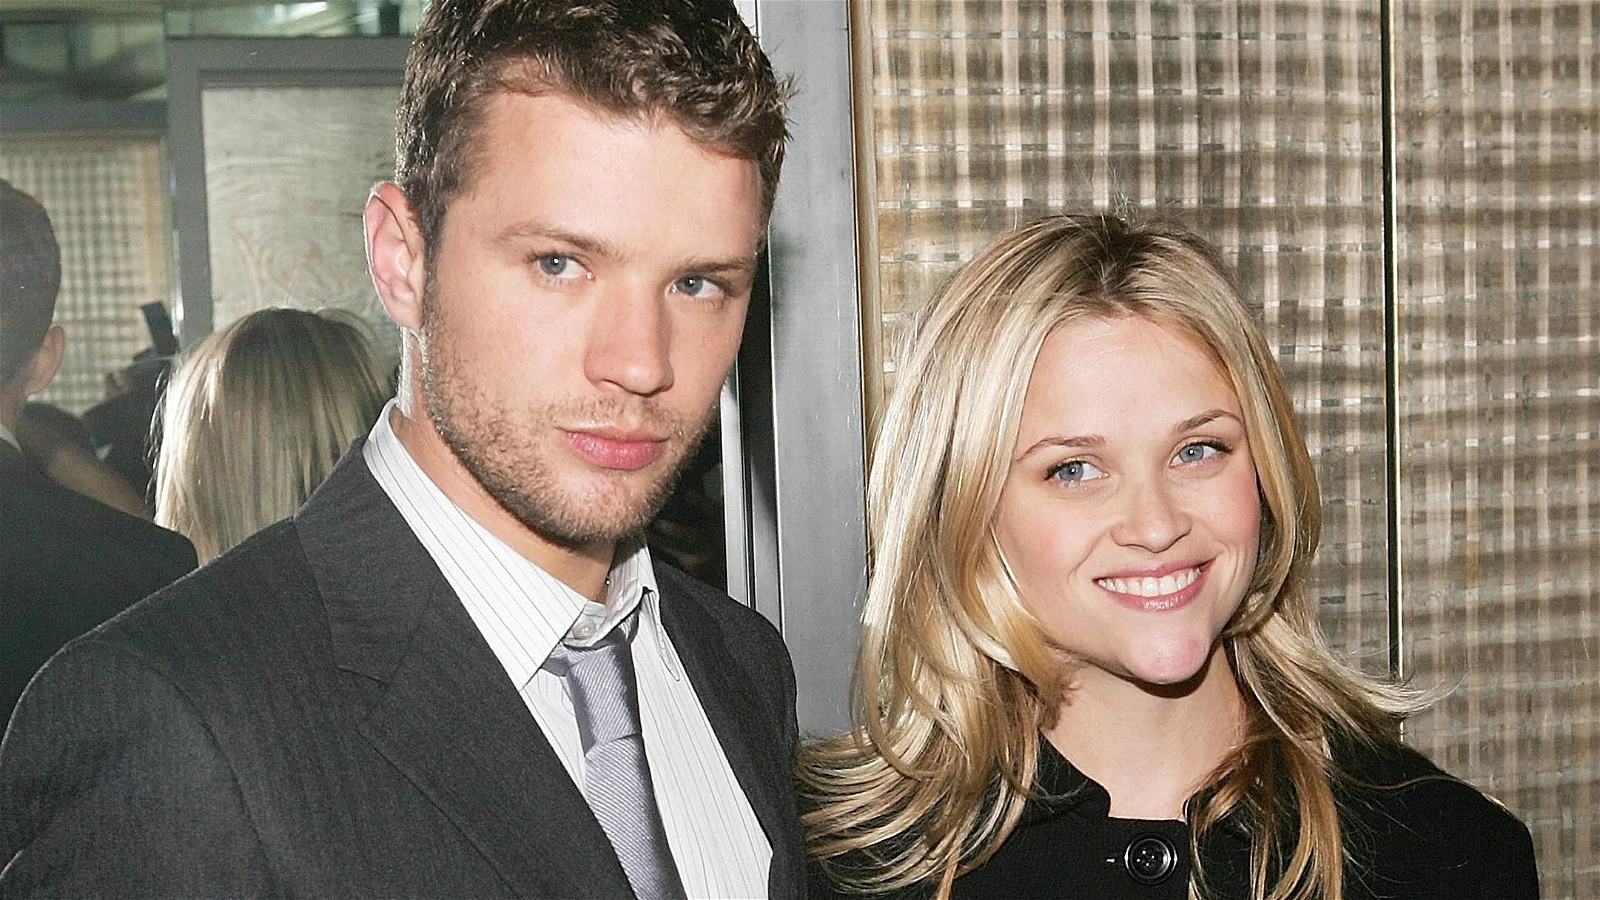 Reese Witherspoon with Ex-husband Ryan Phillippe